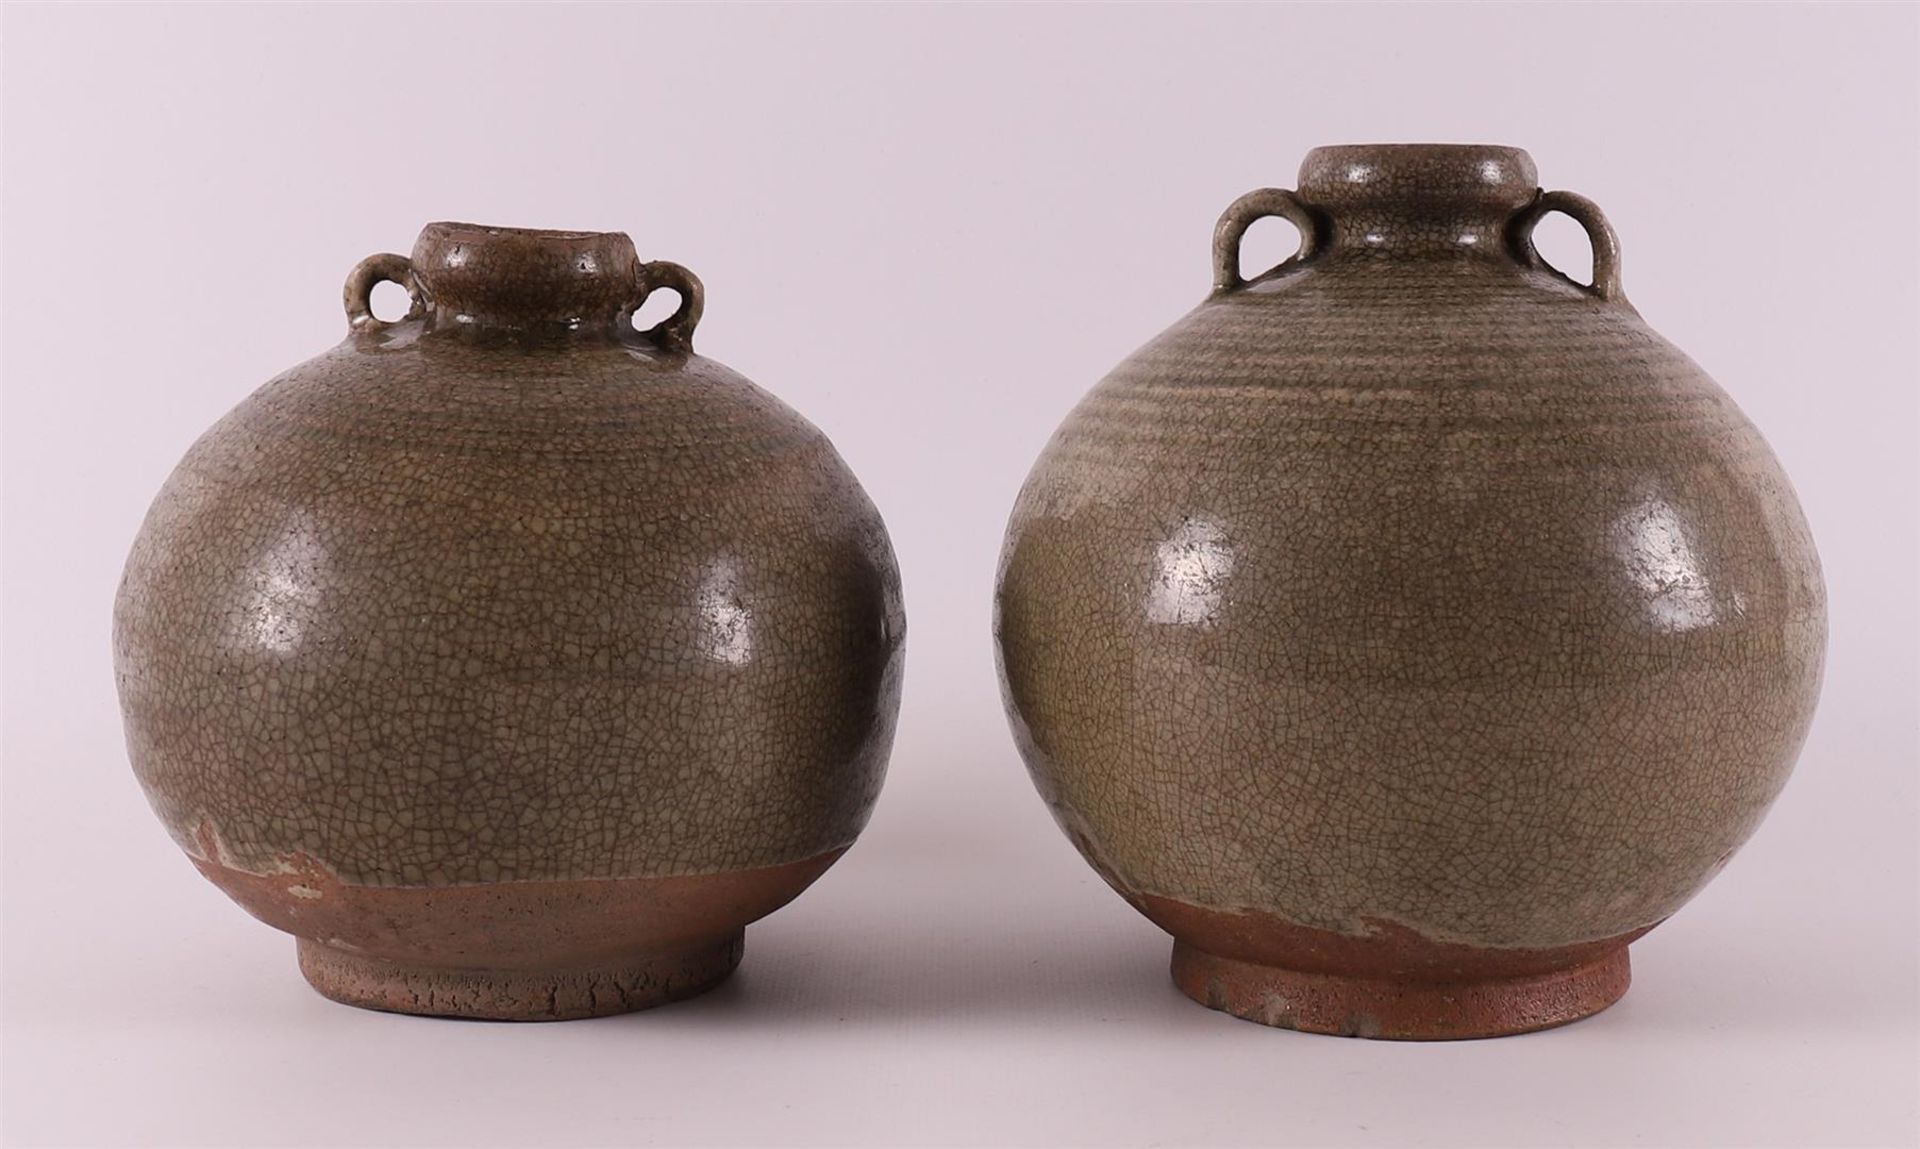 A pair of celadon glazed spherical vases with handles, China, Song Dynasty. - Image 2 of 4